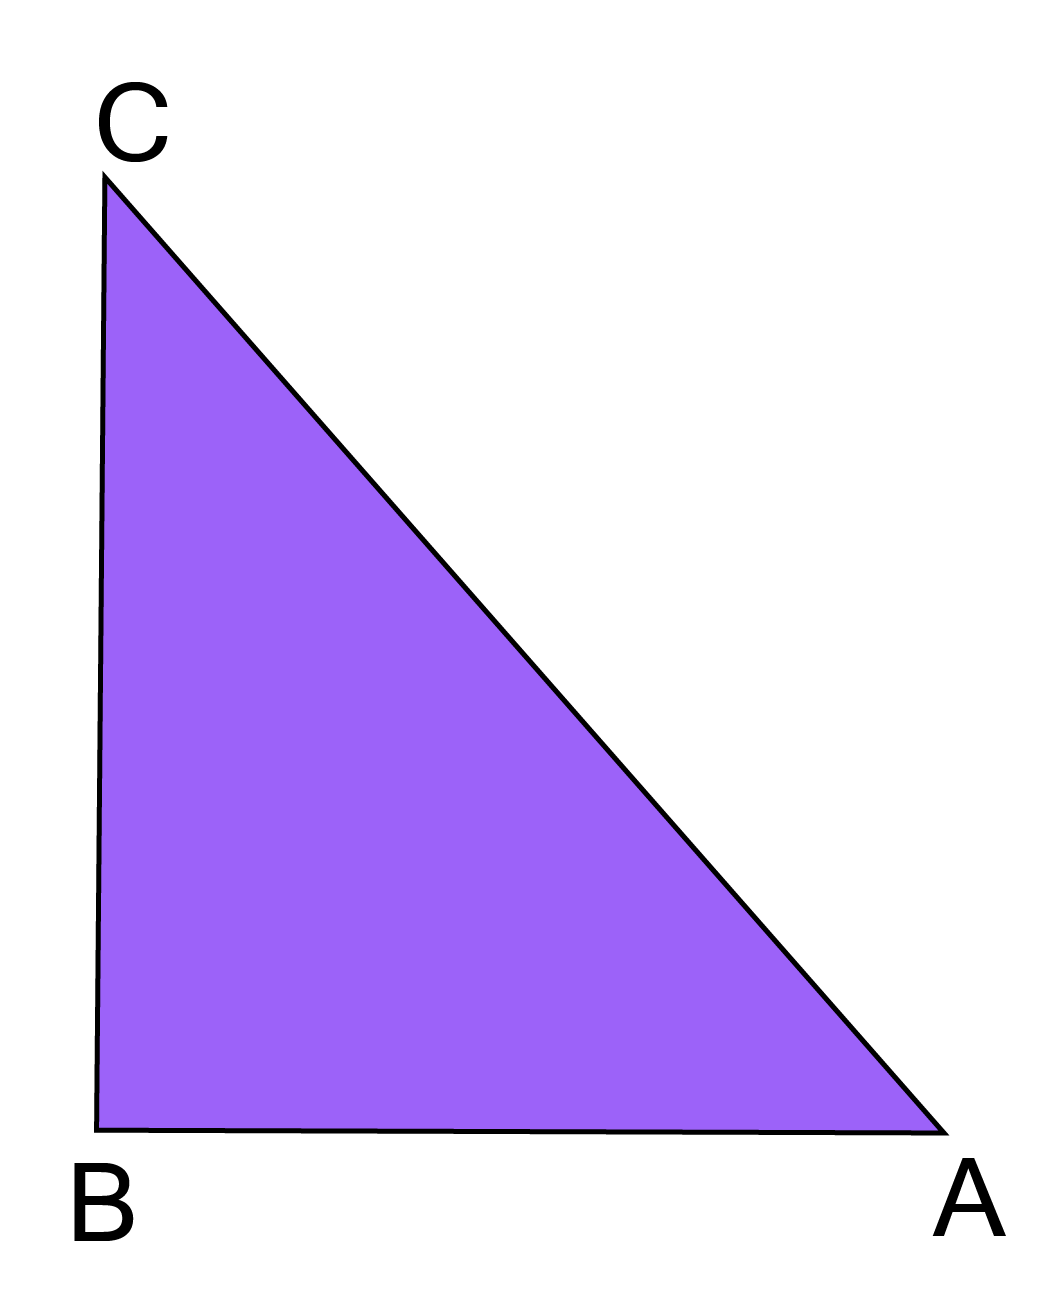 In a right angles triangle, the hypotenuse is the longest side